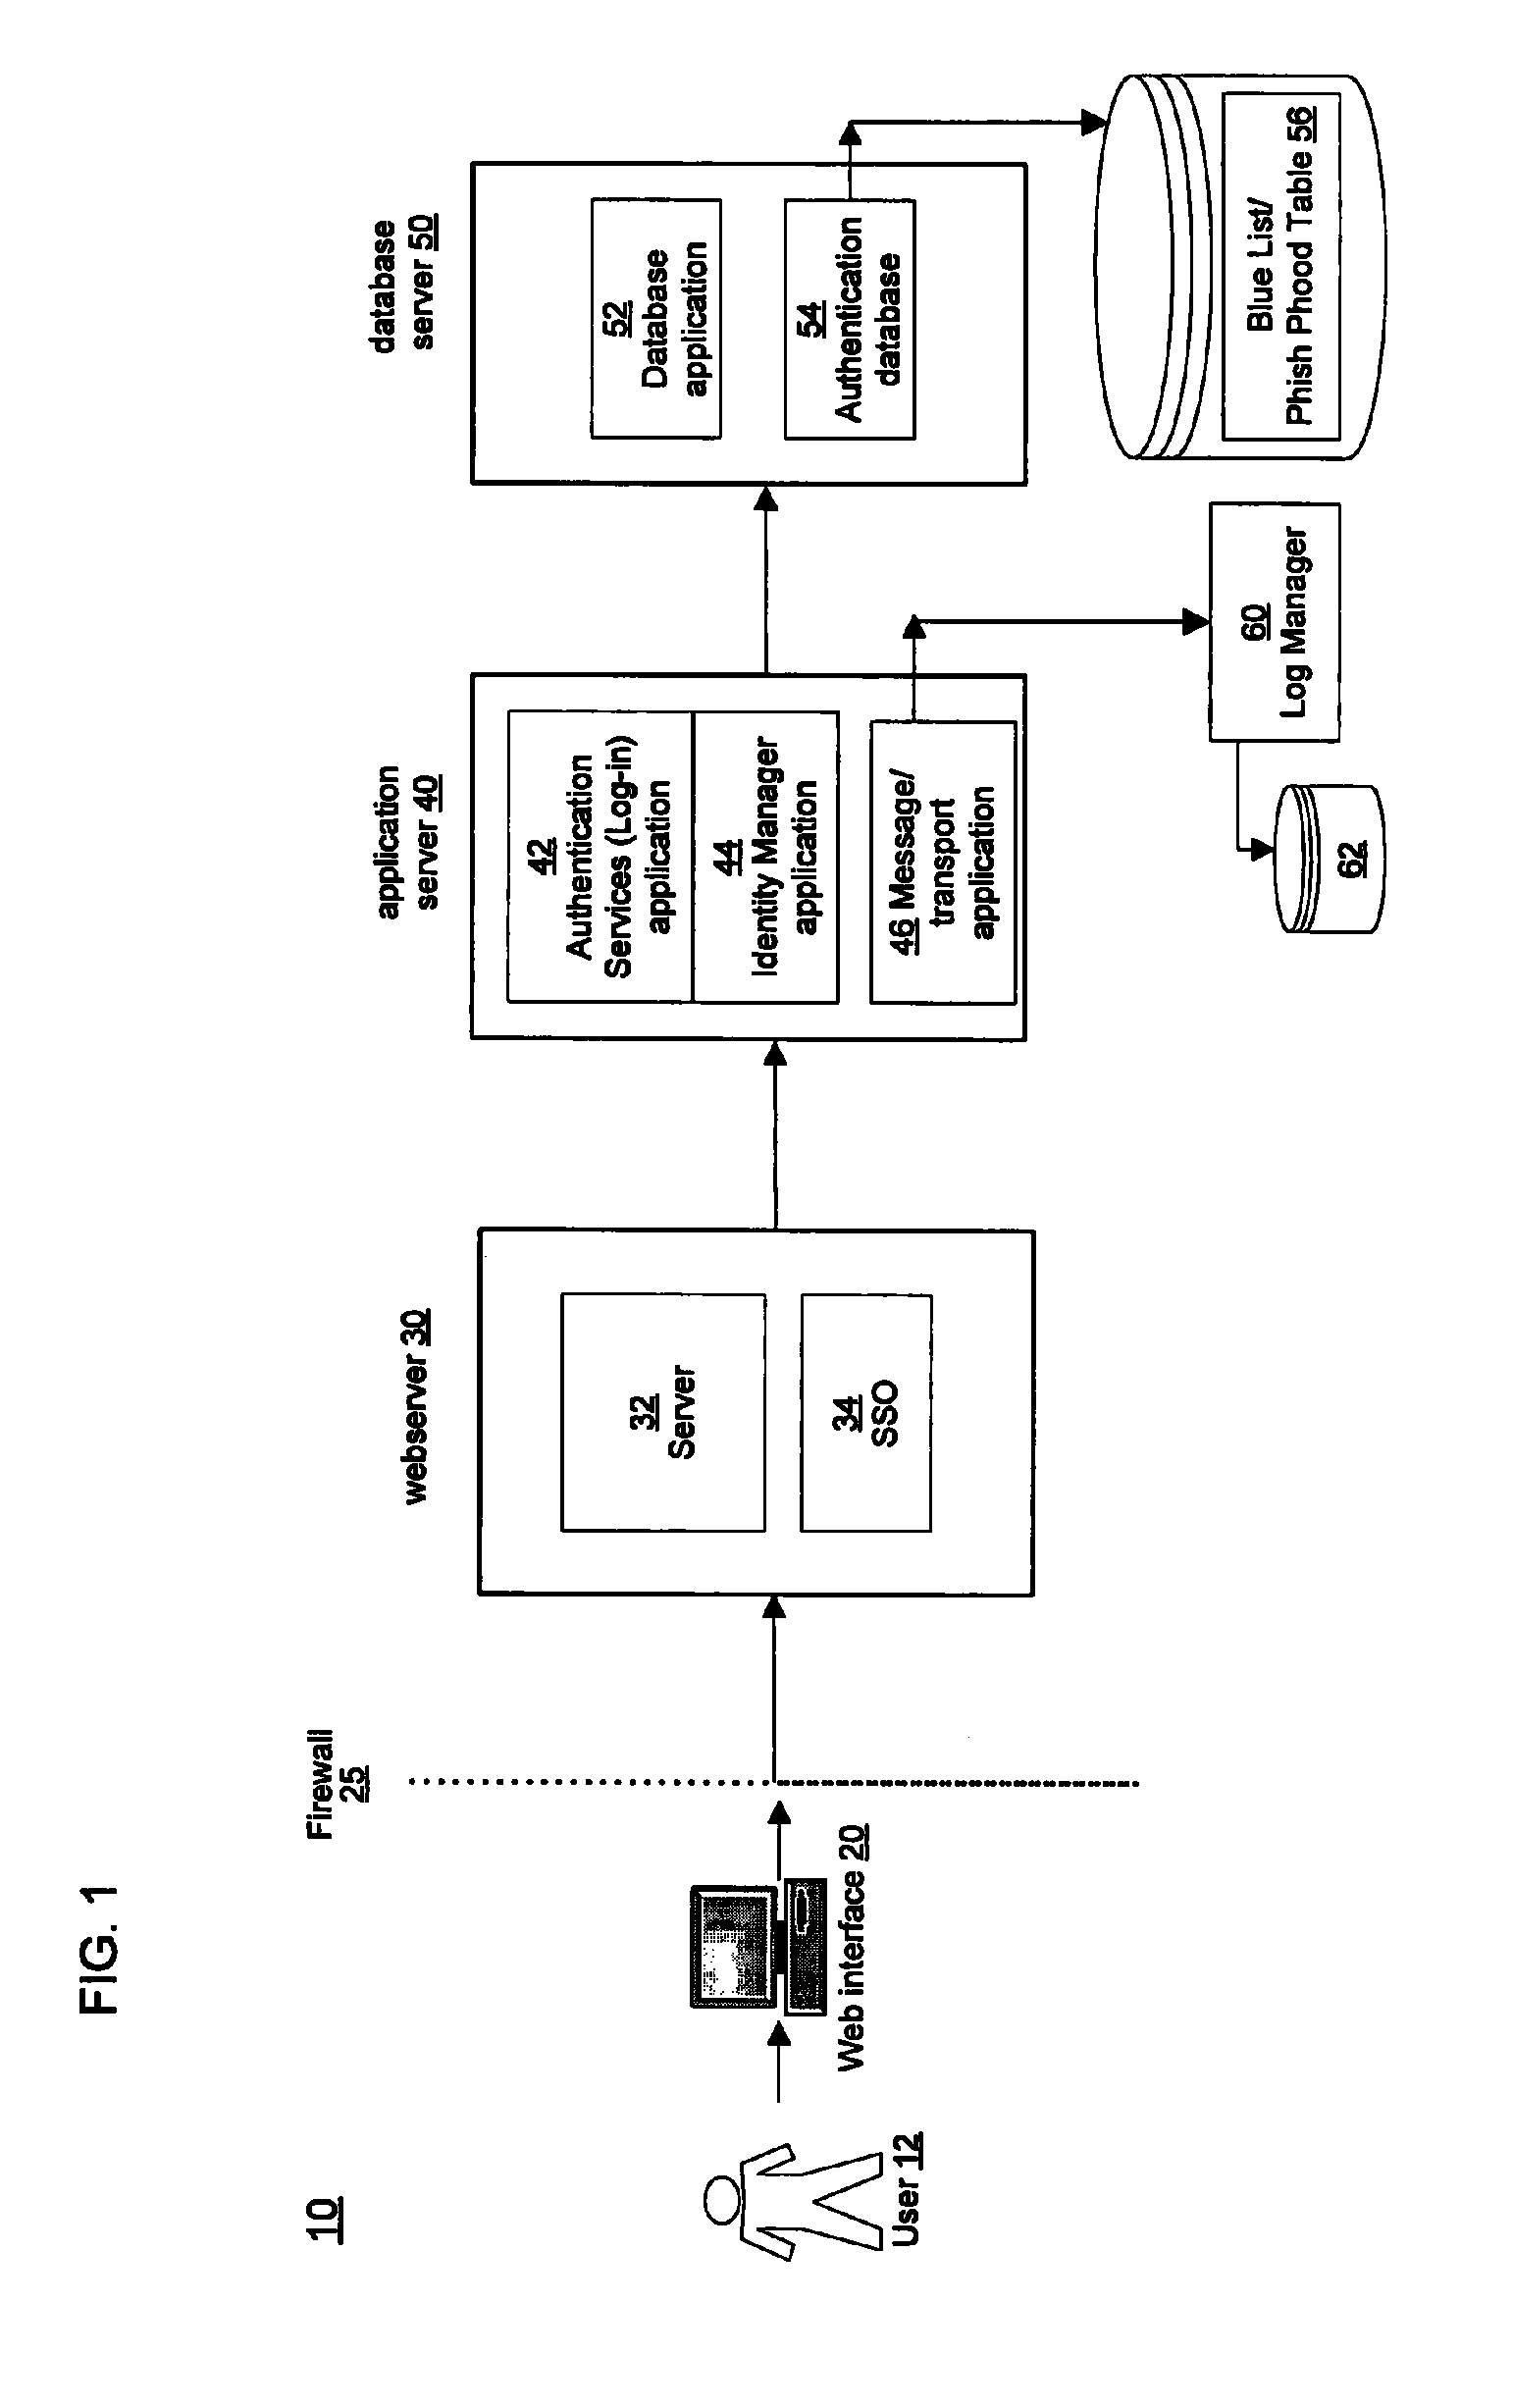 System and method for detection and prevention of computer fraud